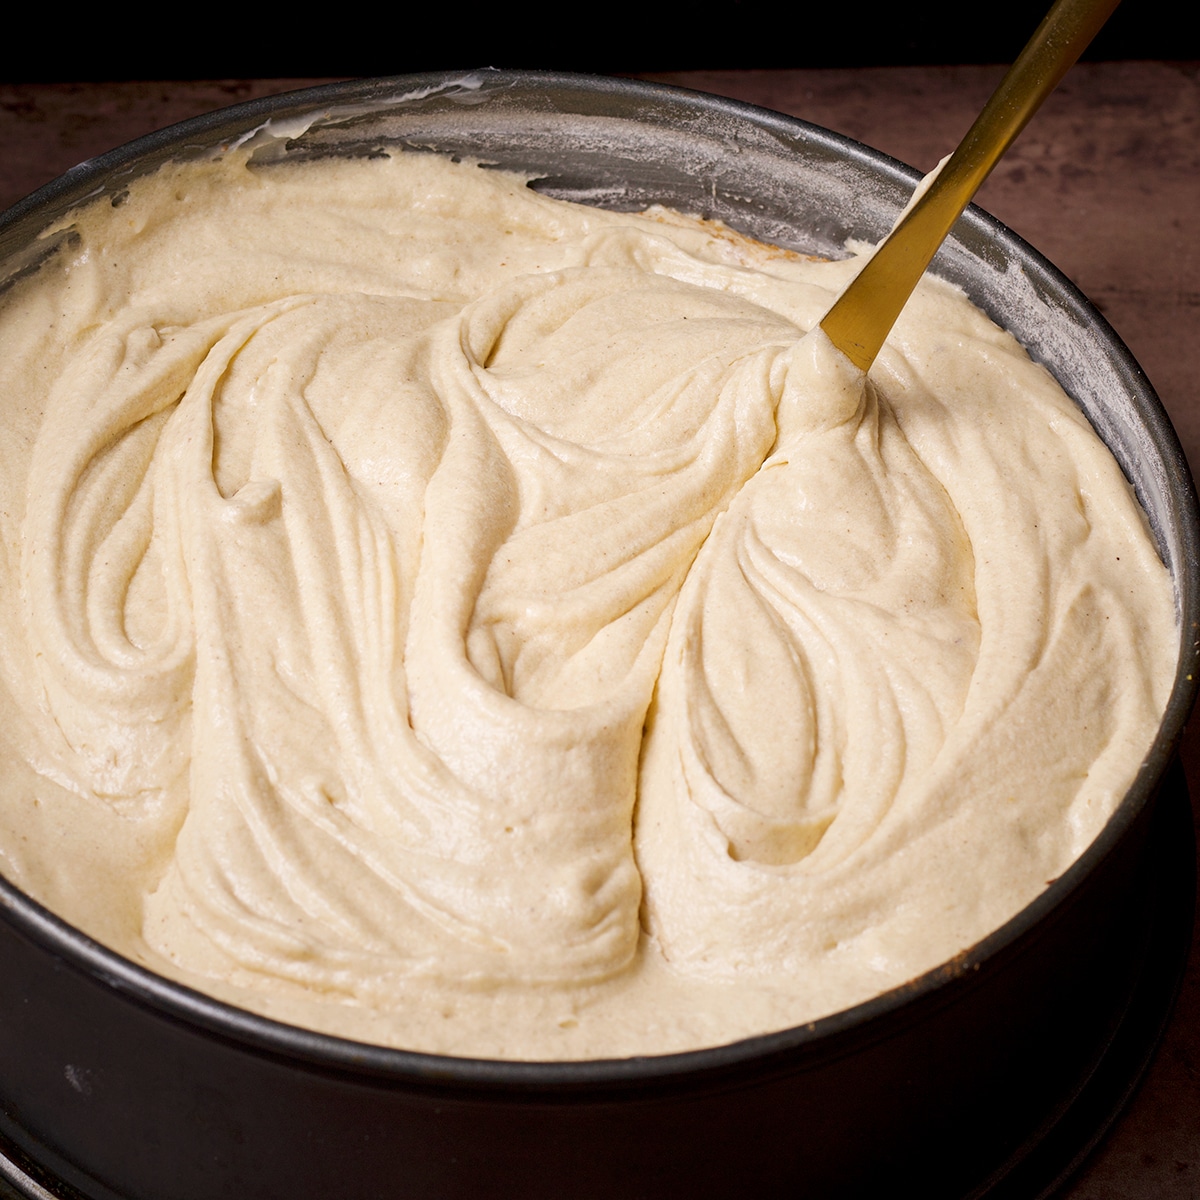 Using a butter knife to swirl cinnamon sugar into cake batter.